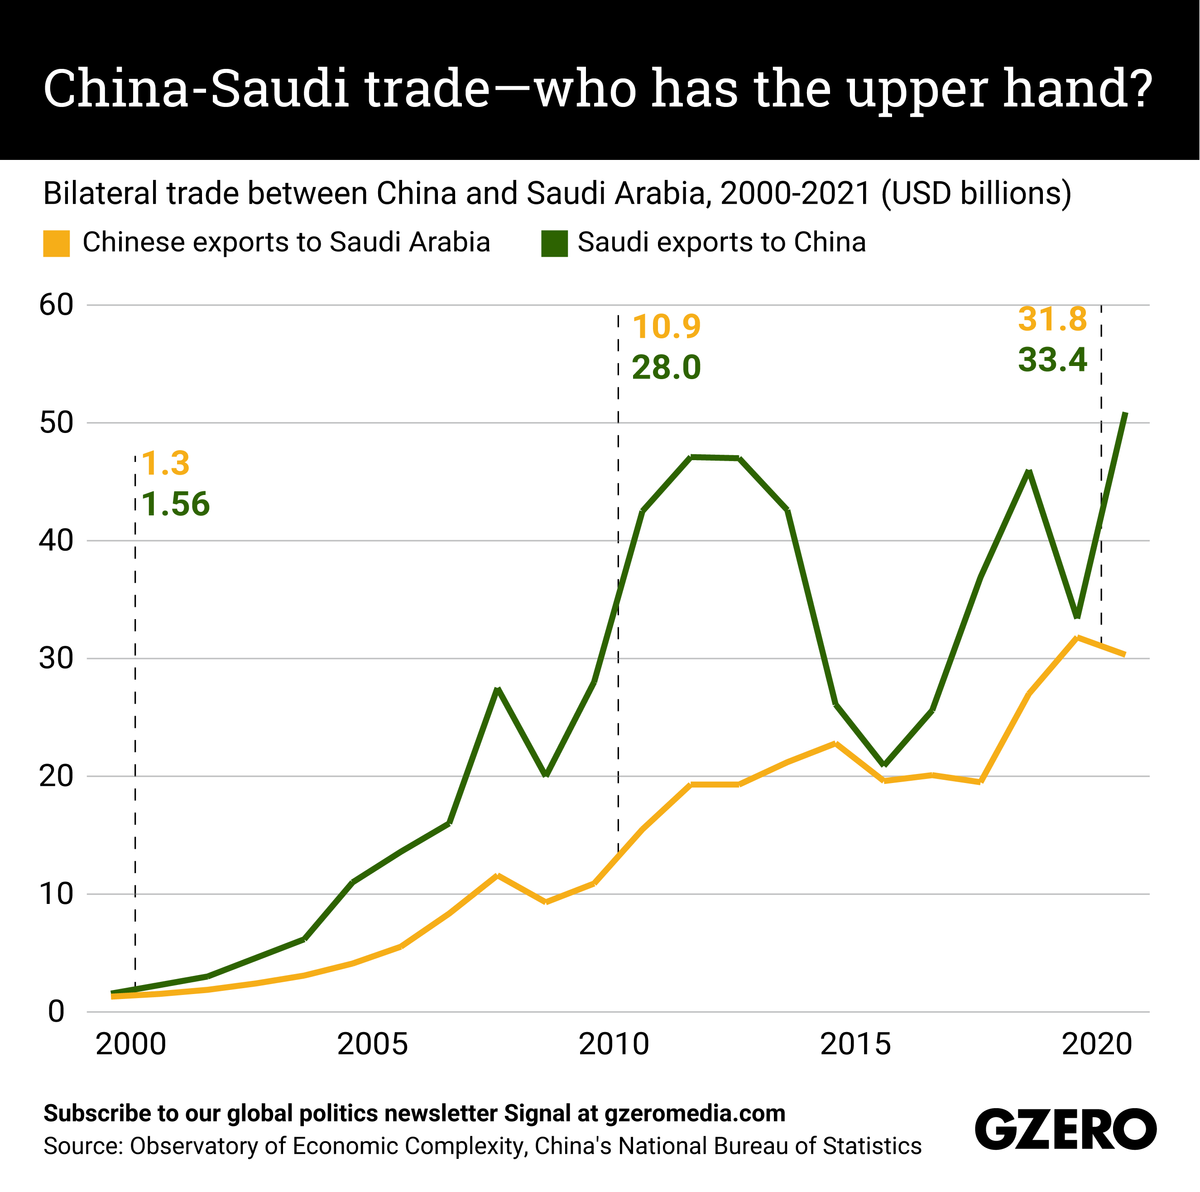 The Graphic Truth: China-Saudi trade — who has the upper hand?